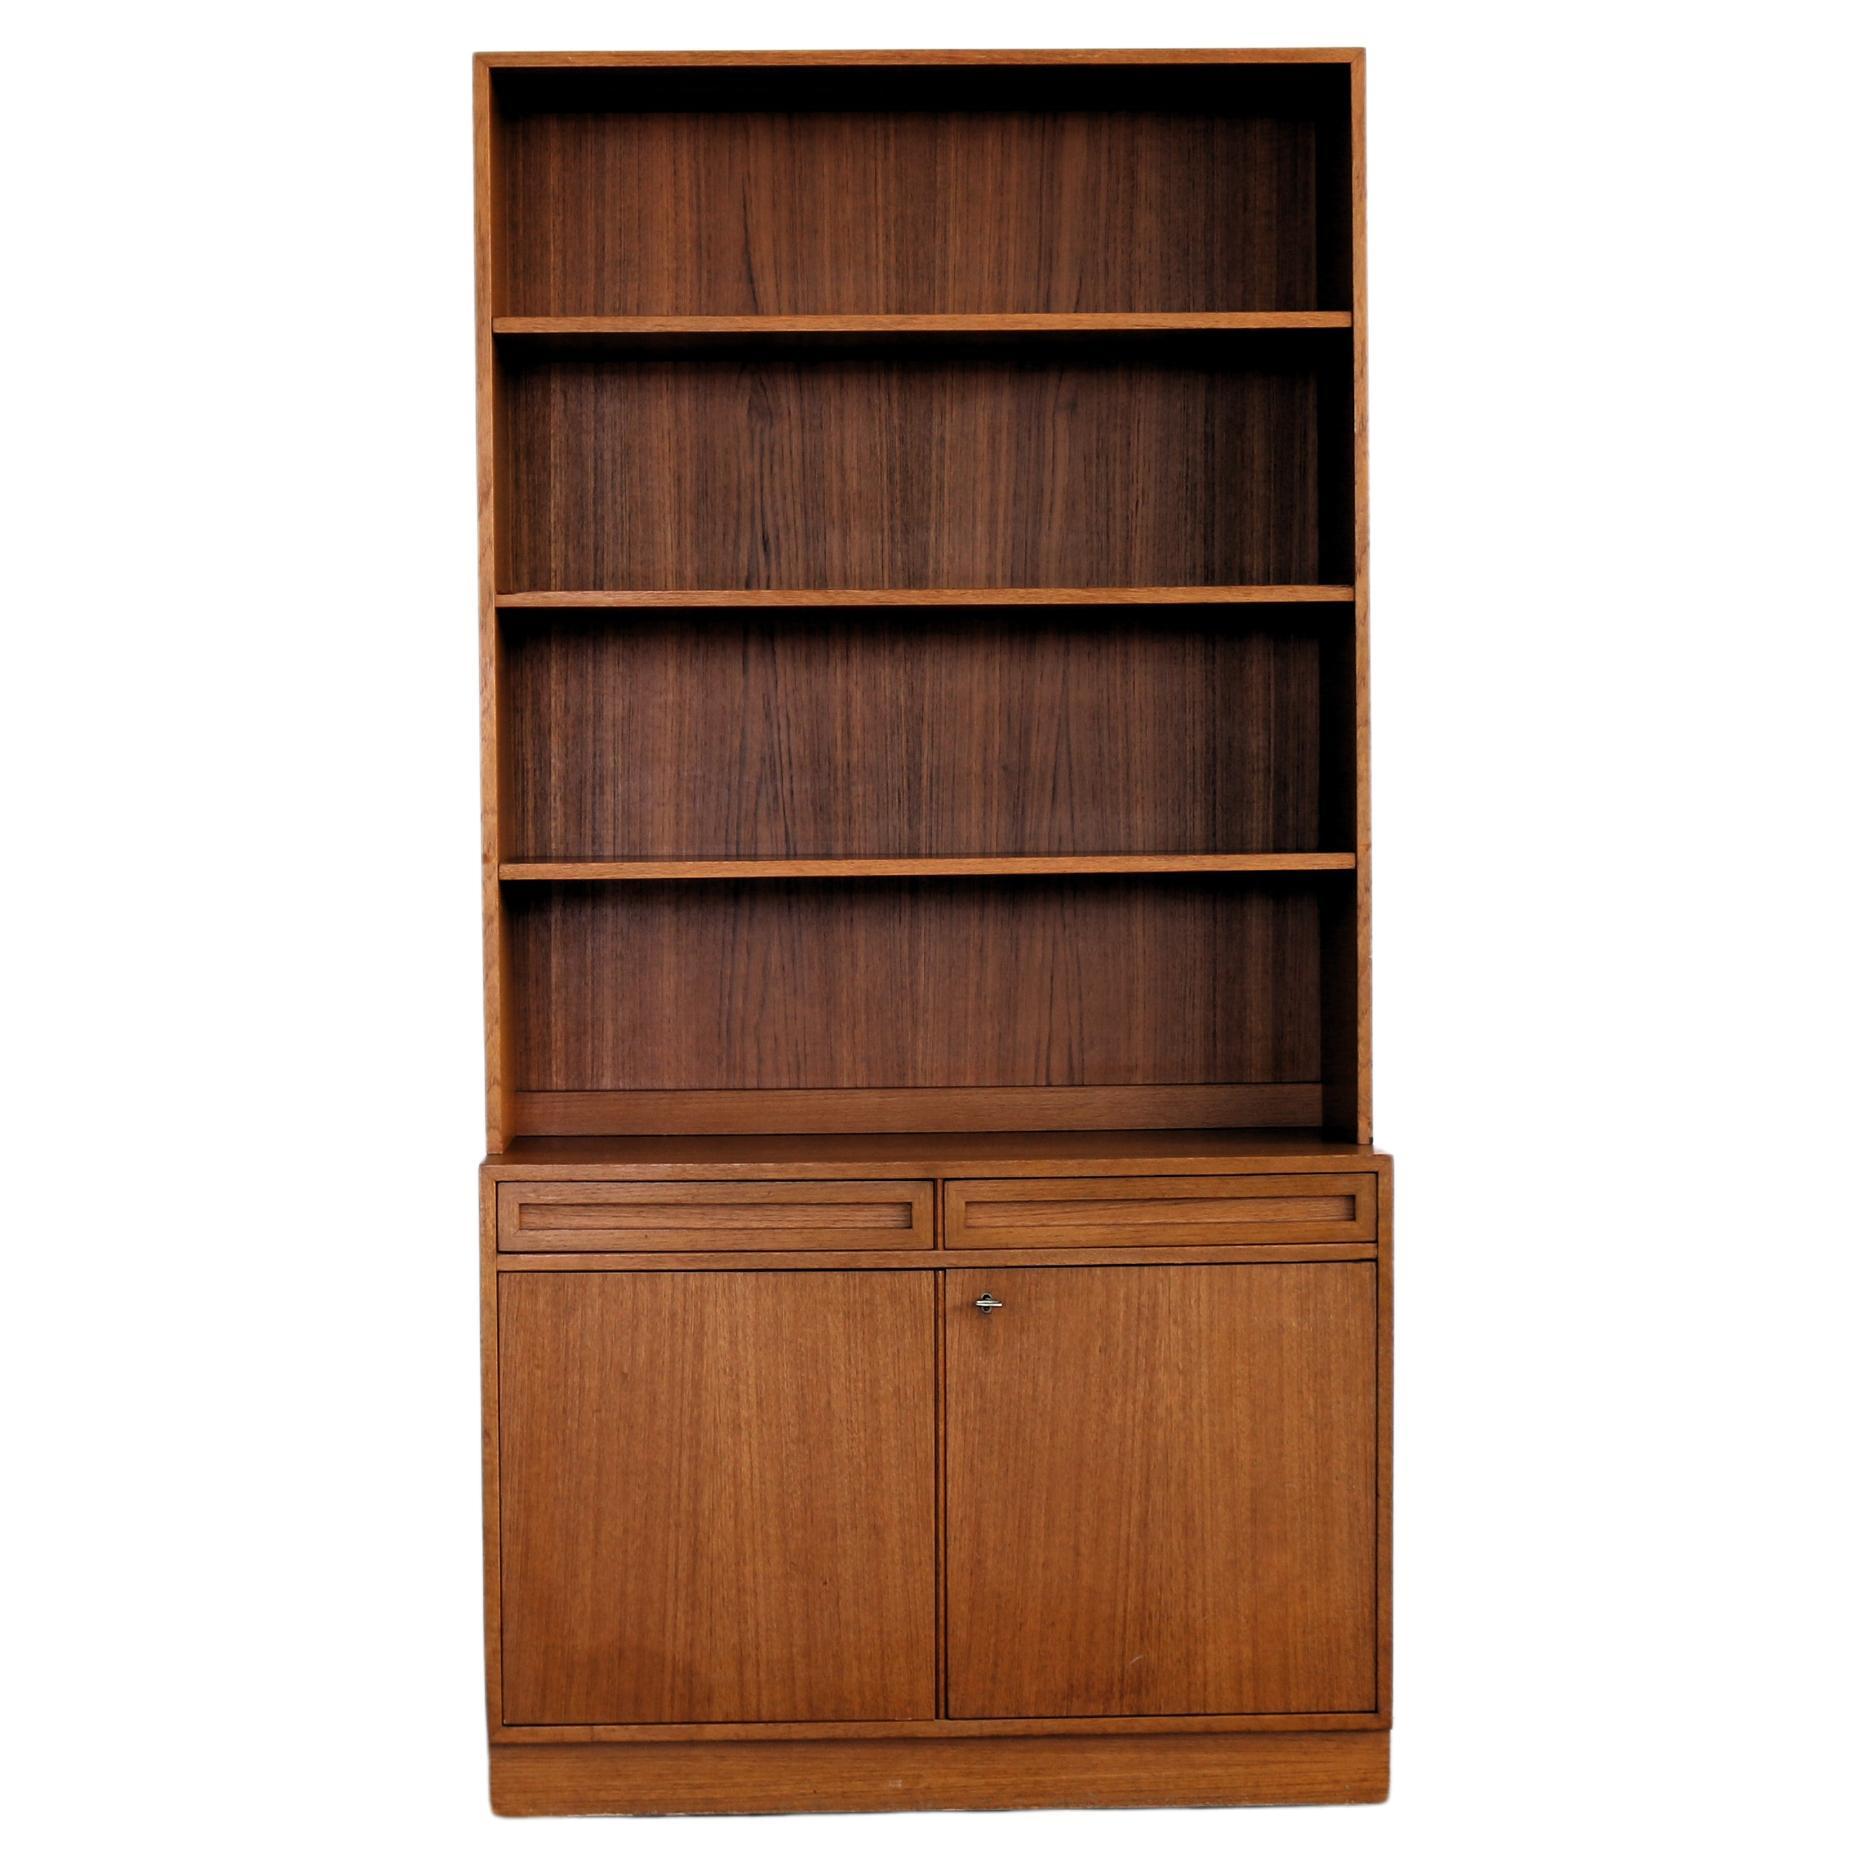 vintage bookcase  cabinets  wall cabinets  teak